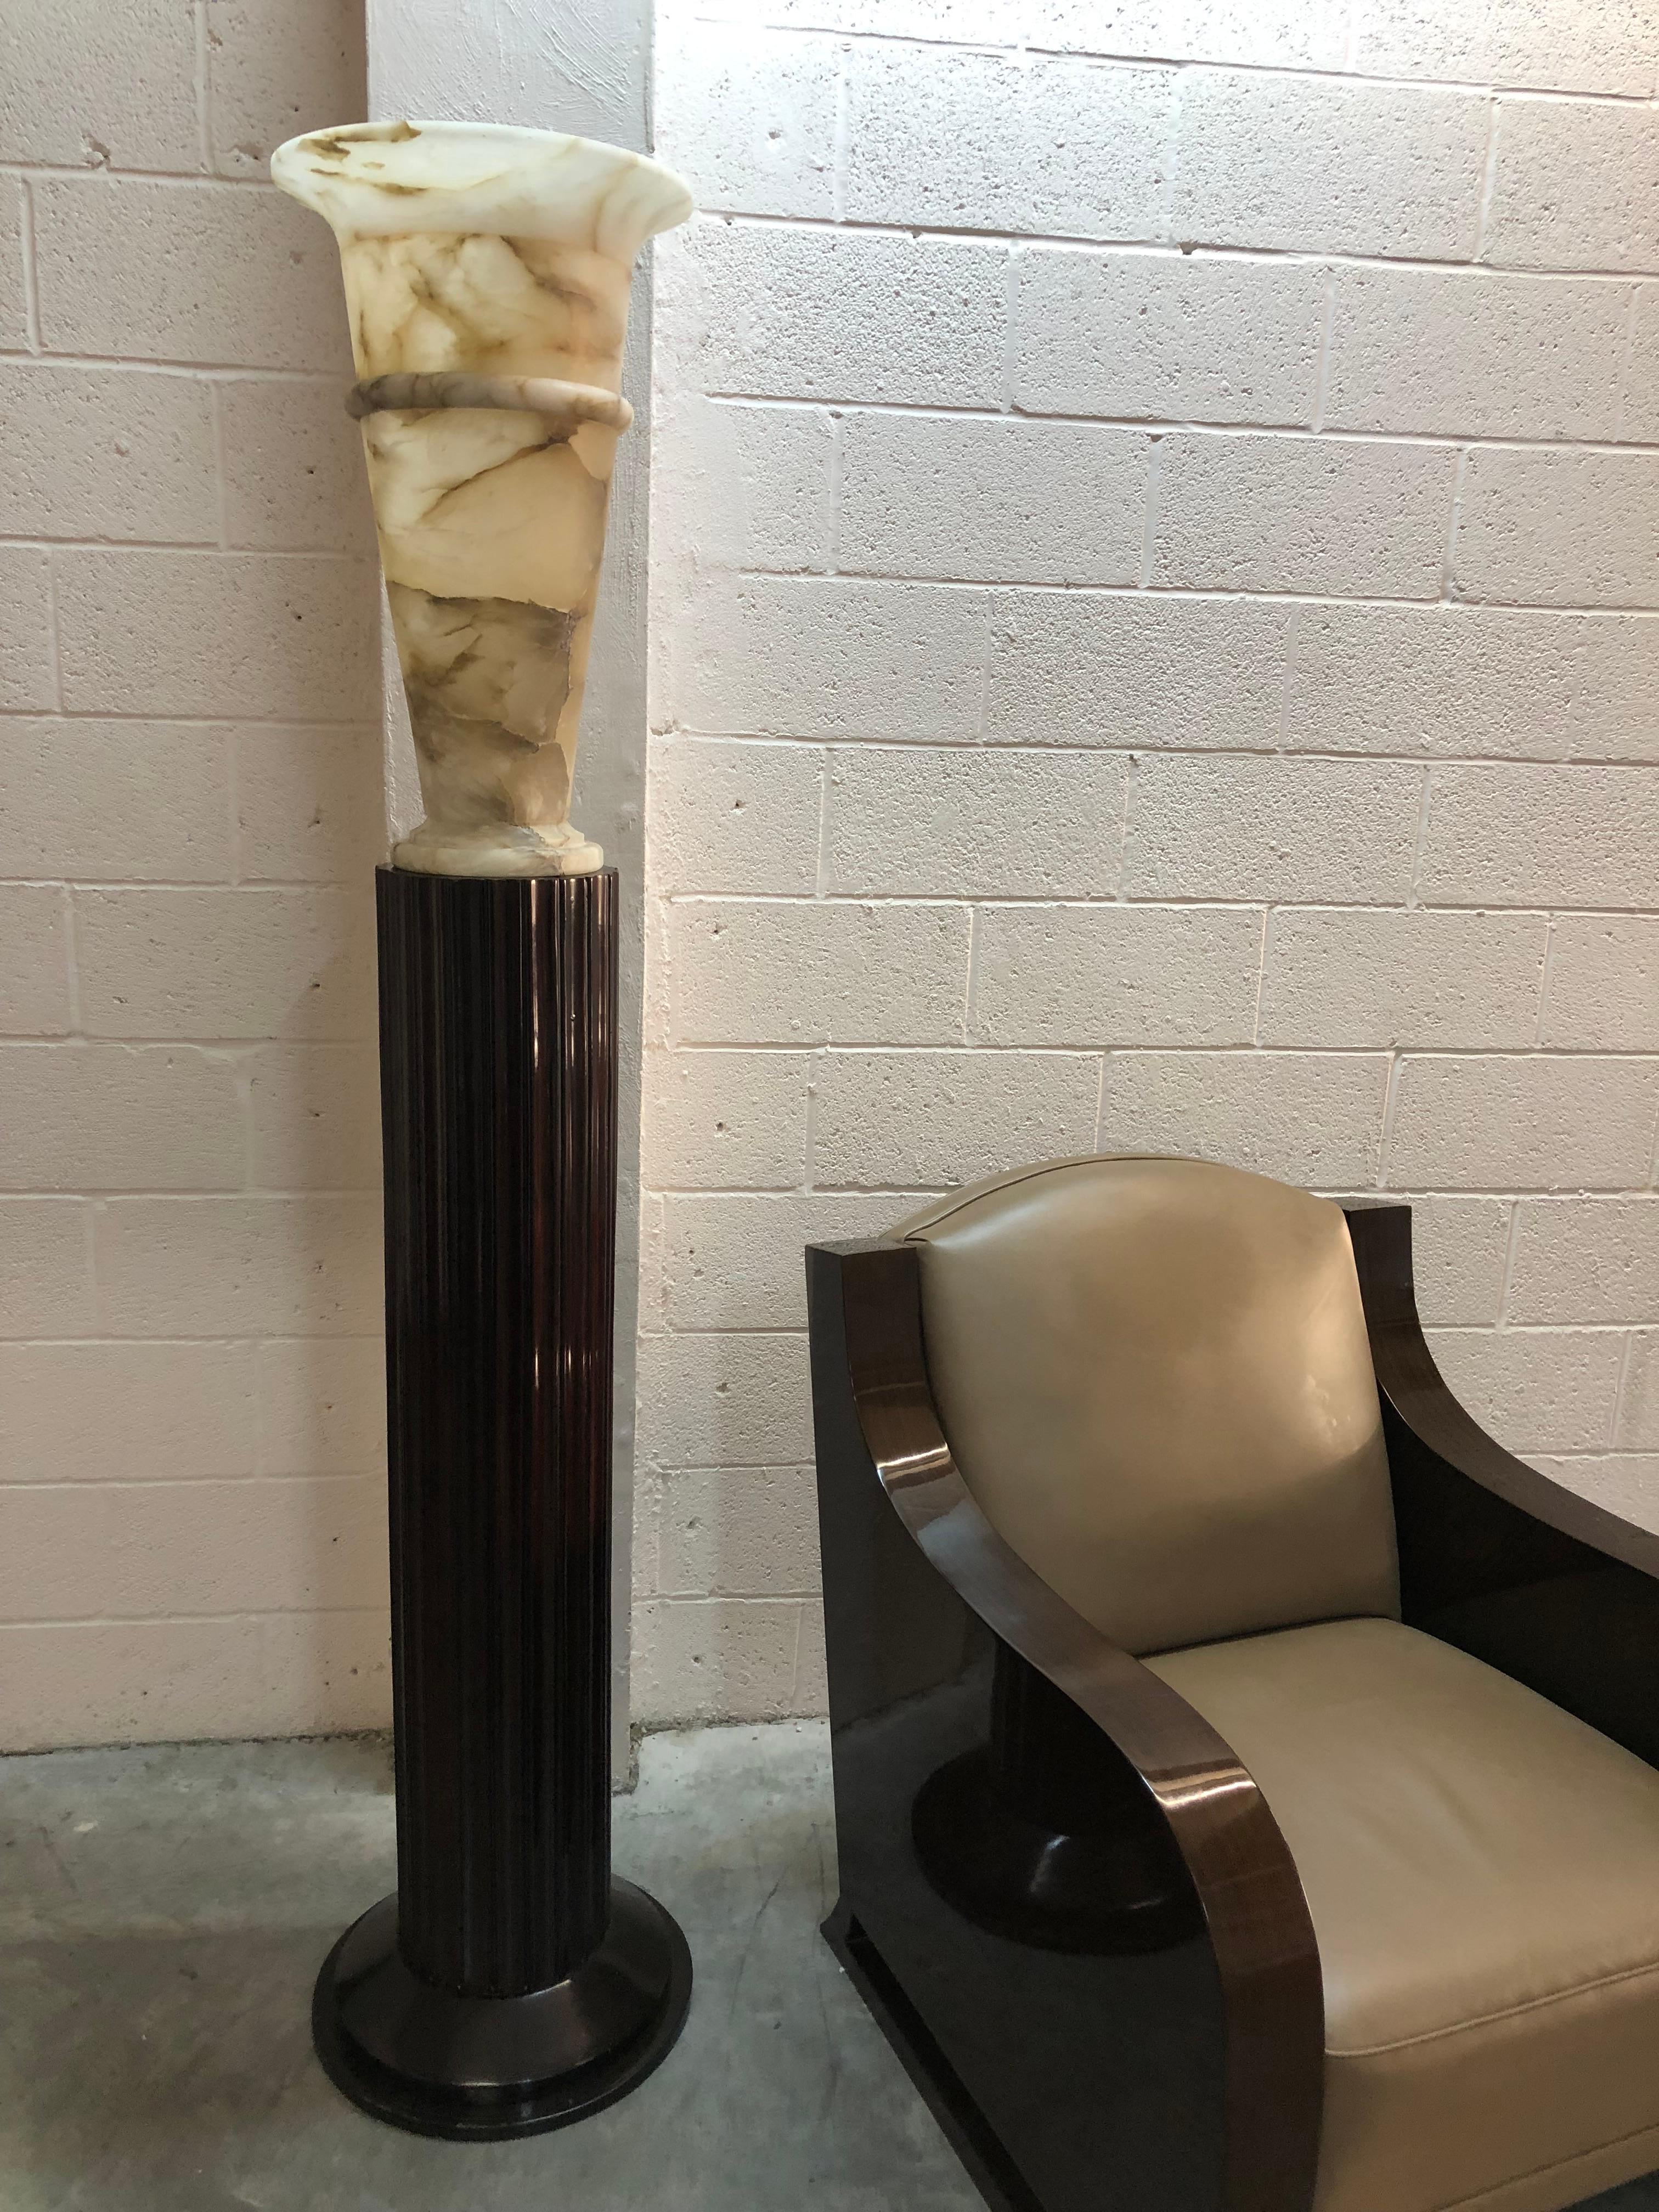 Pair of Art Deco Floor Lamps, France, Materials: Wood and Alabaster, 1930 For Sale 12